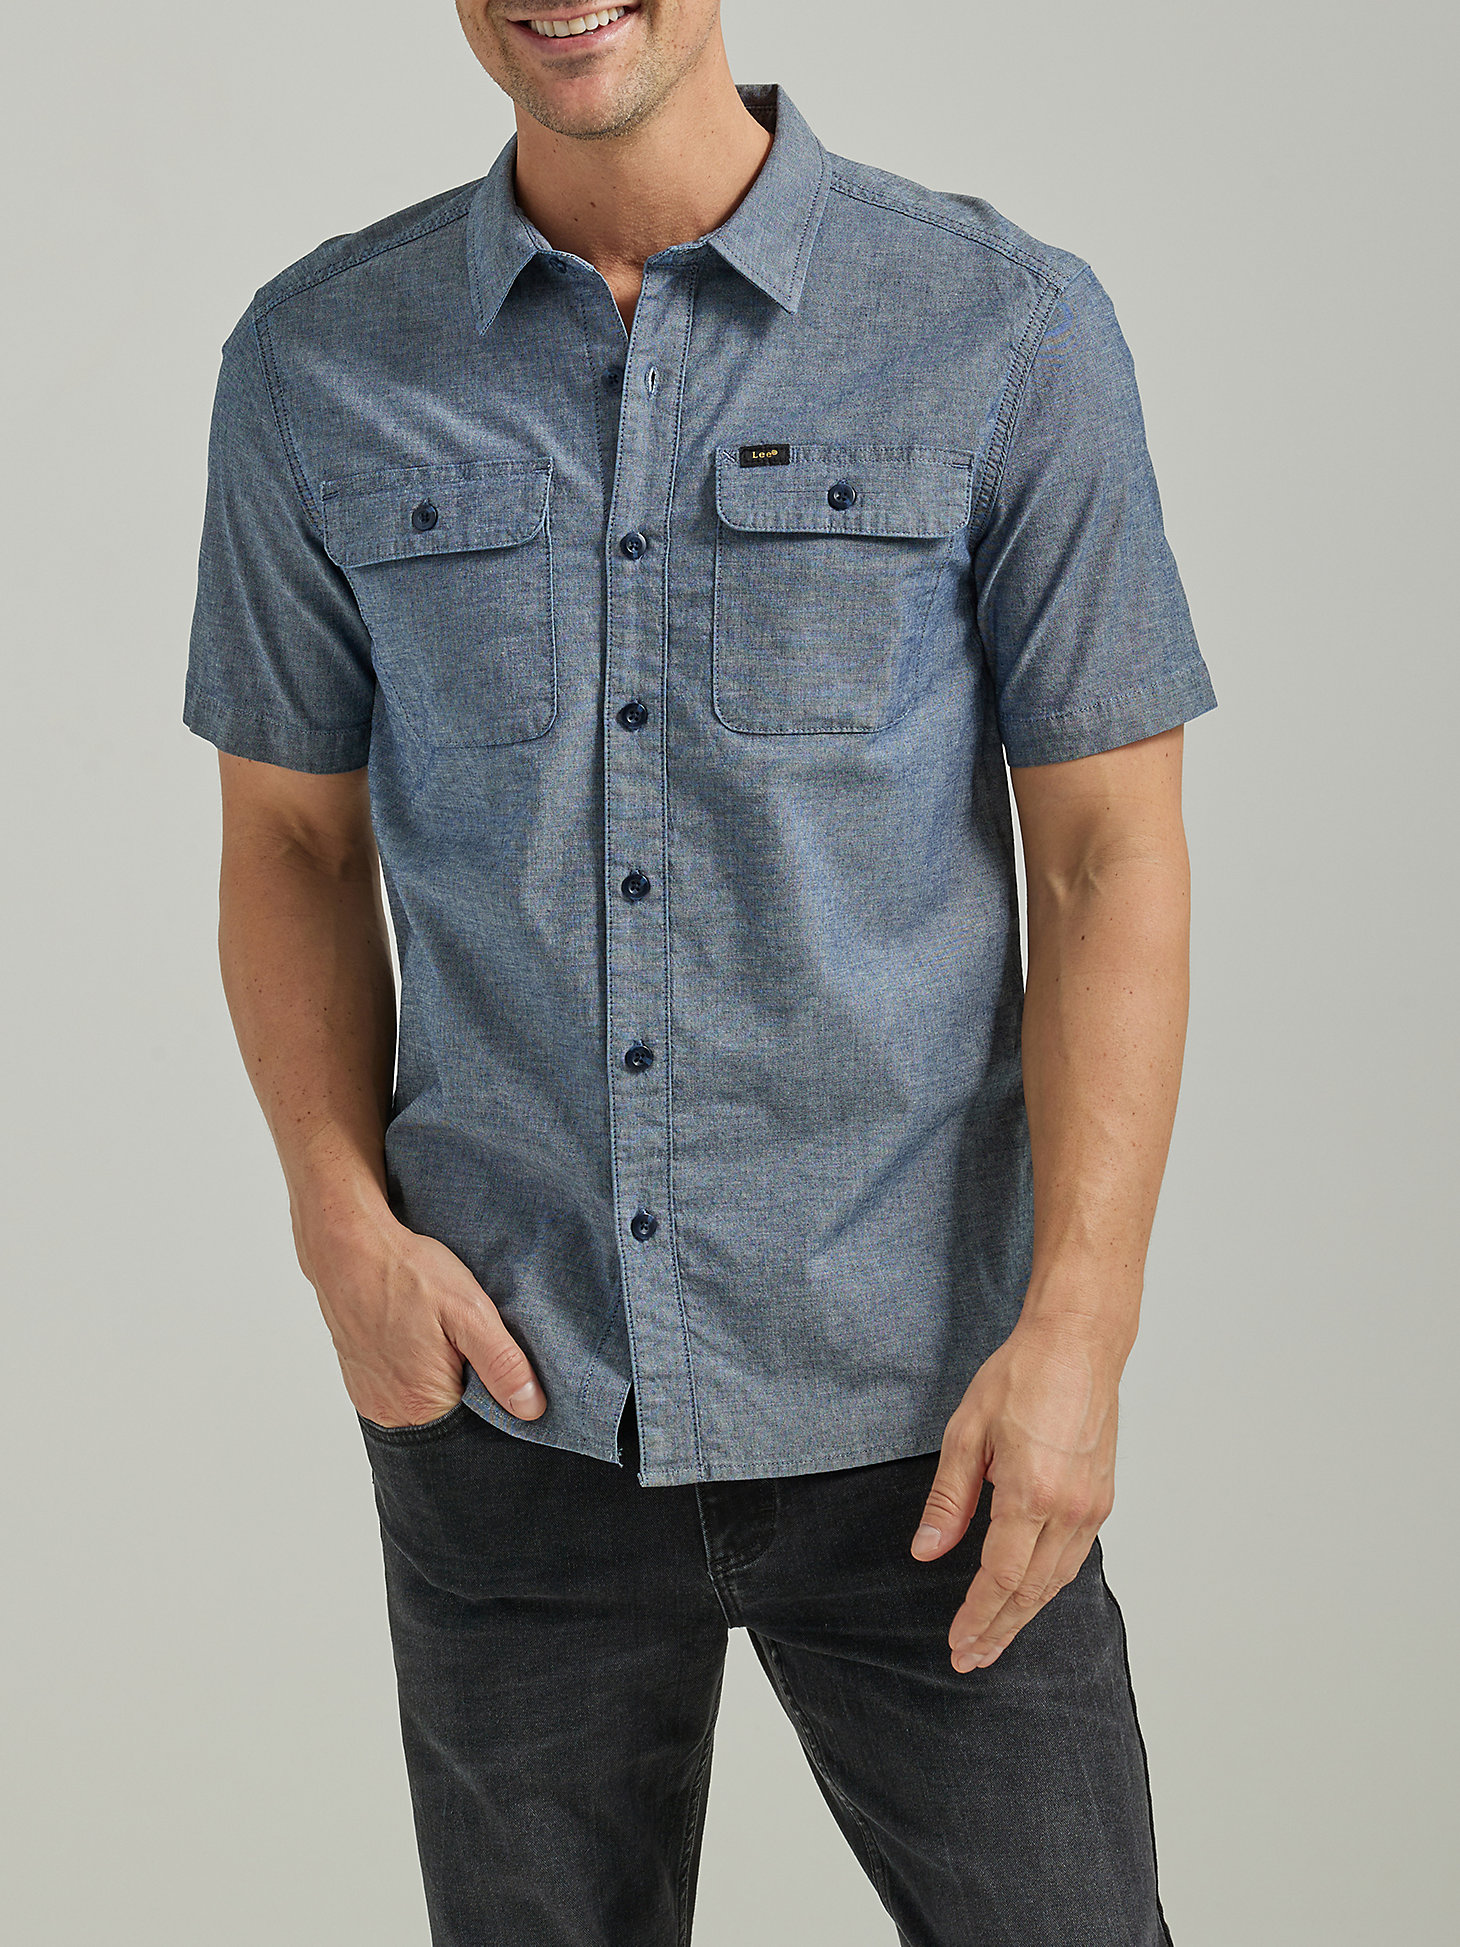 Men's Extreme Motion Short Sleeve Worker Shirt in Mid Wash Chambray main view